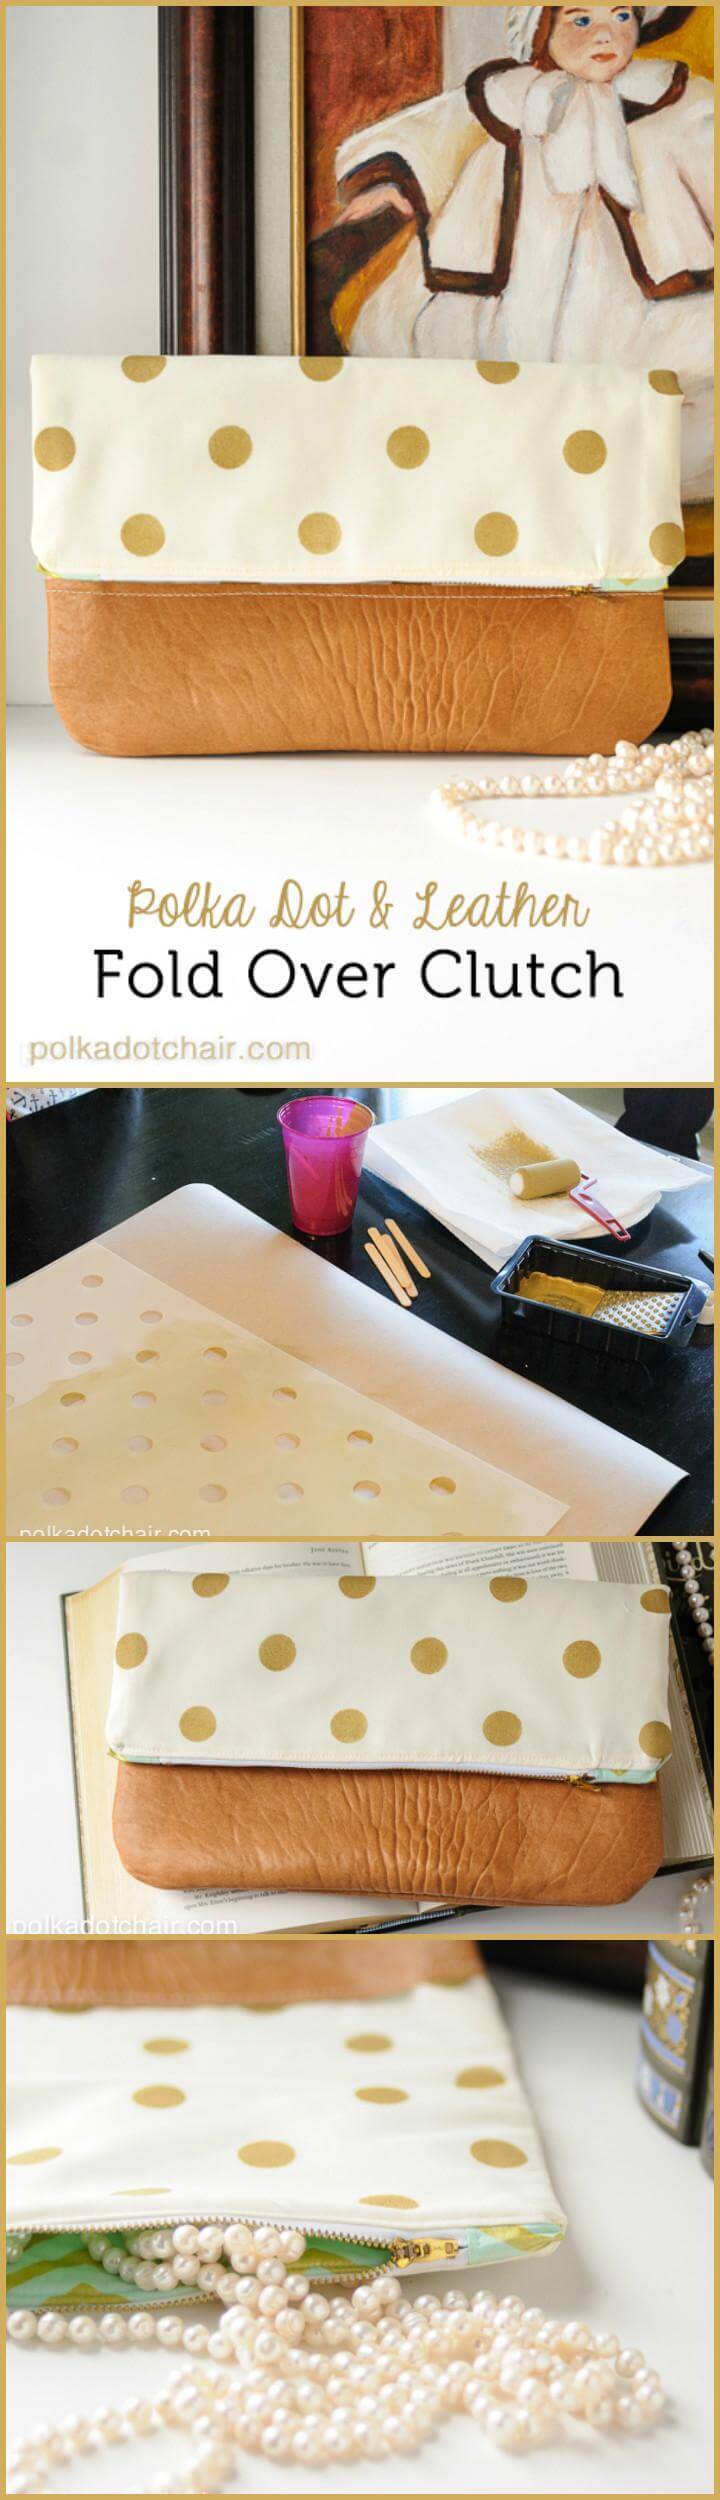 DIY polka dot and leather fold over clutch Mother's Day gift